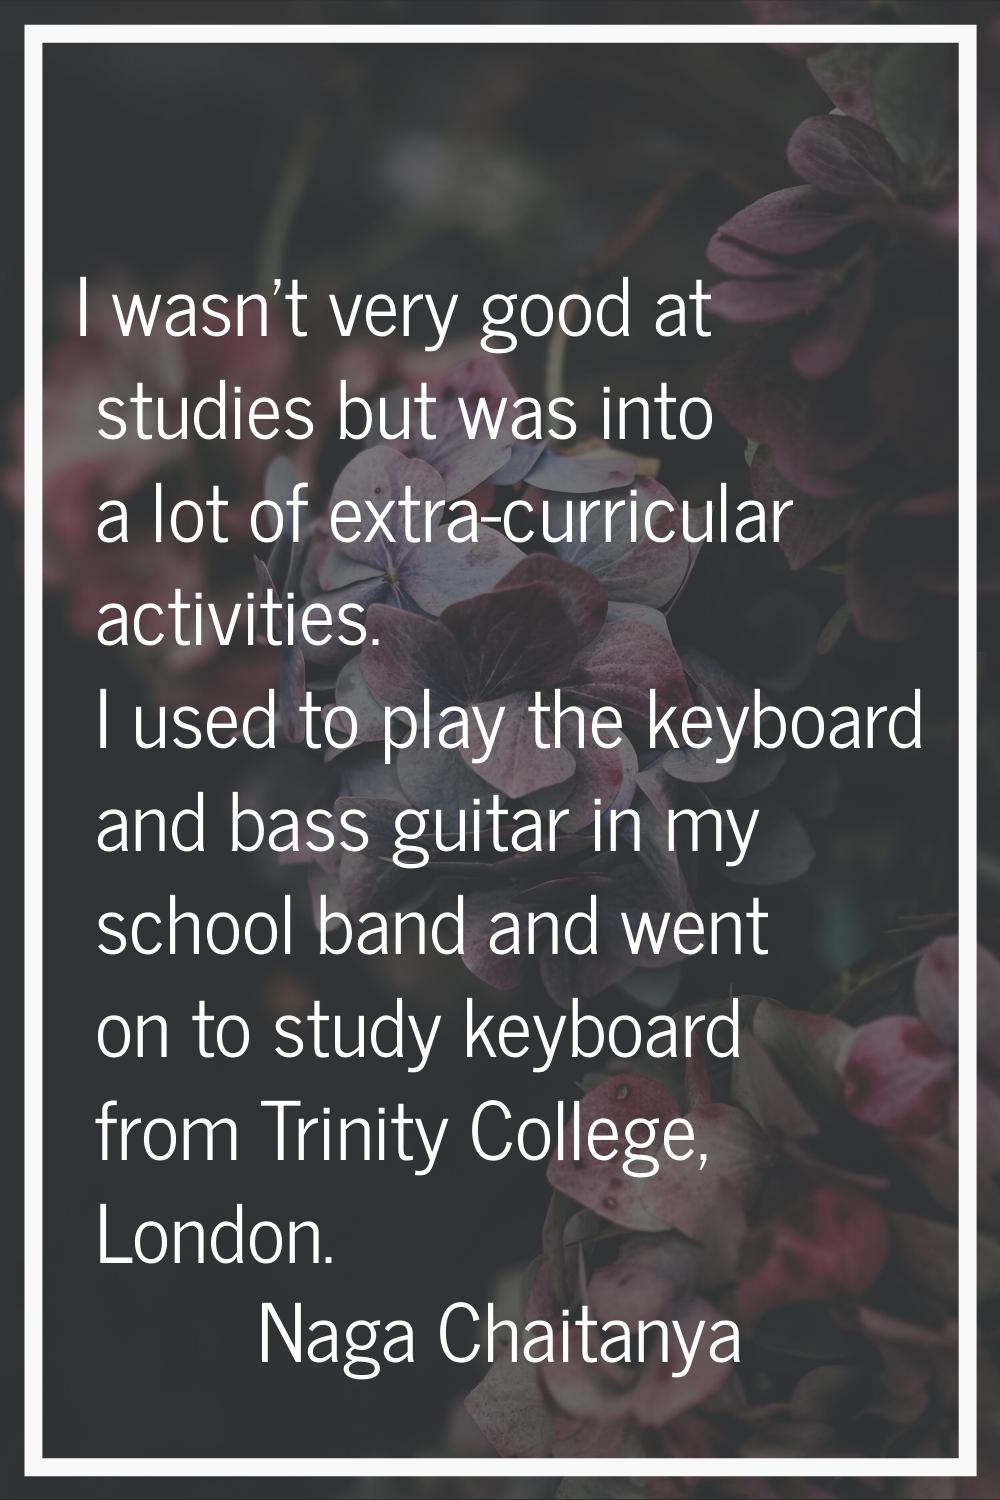 I wasn't very good at studies but was into a lot of extra-curricular activities. I used to play the